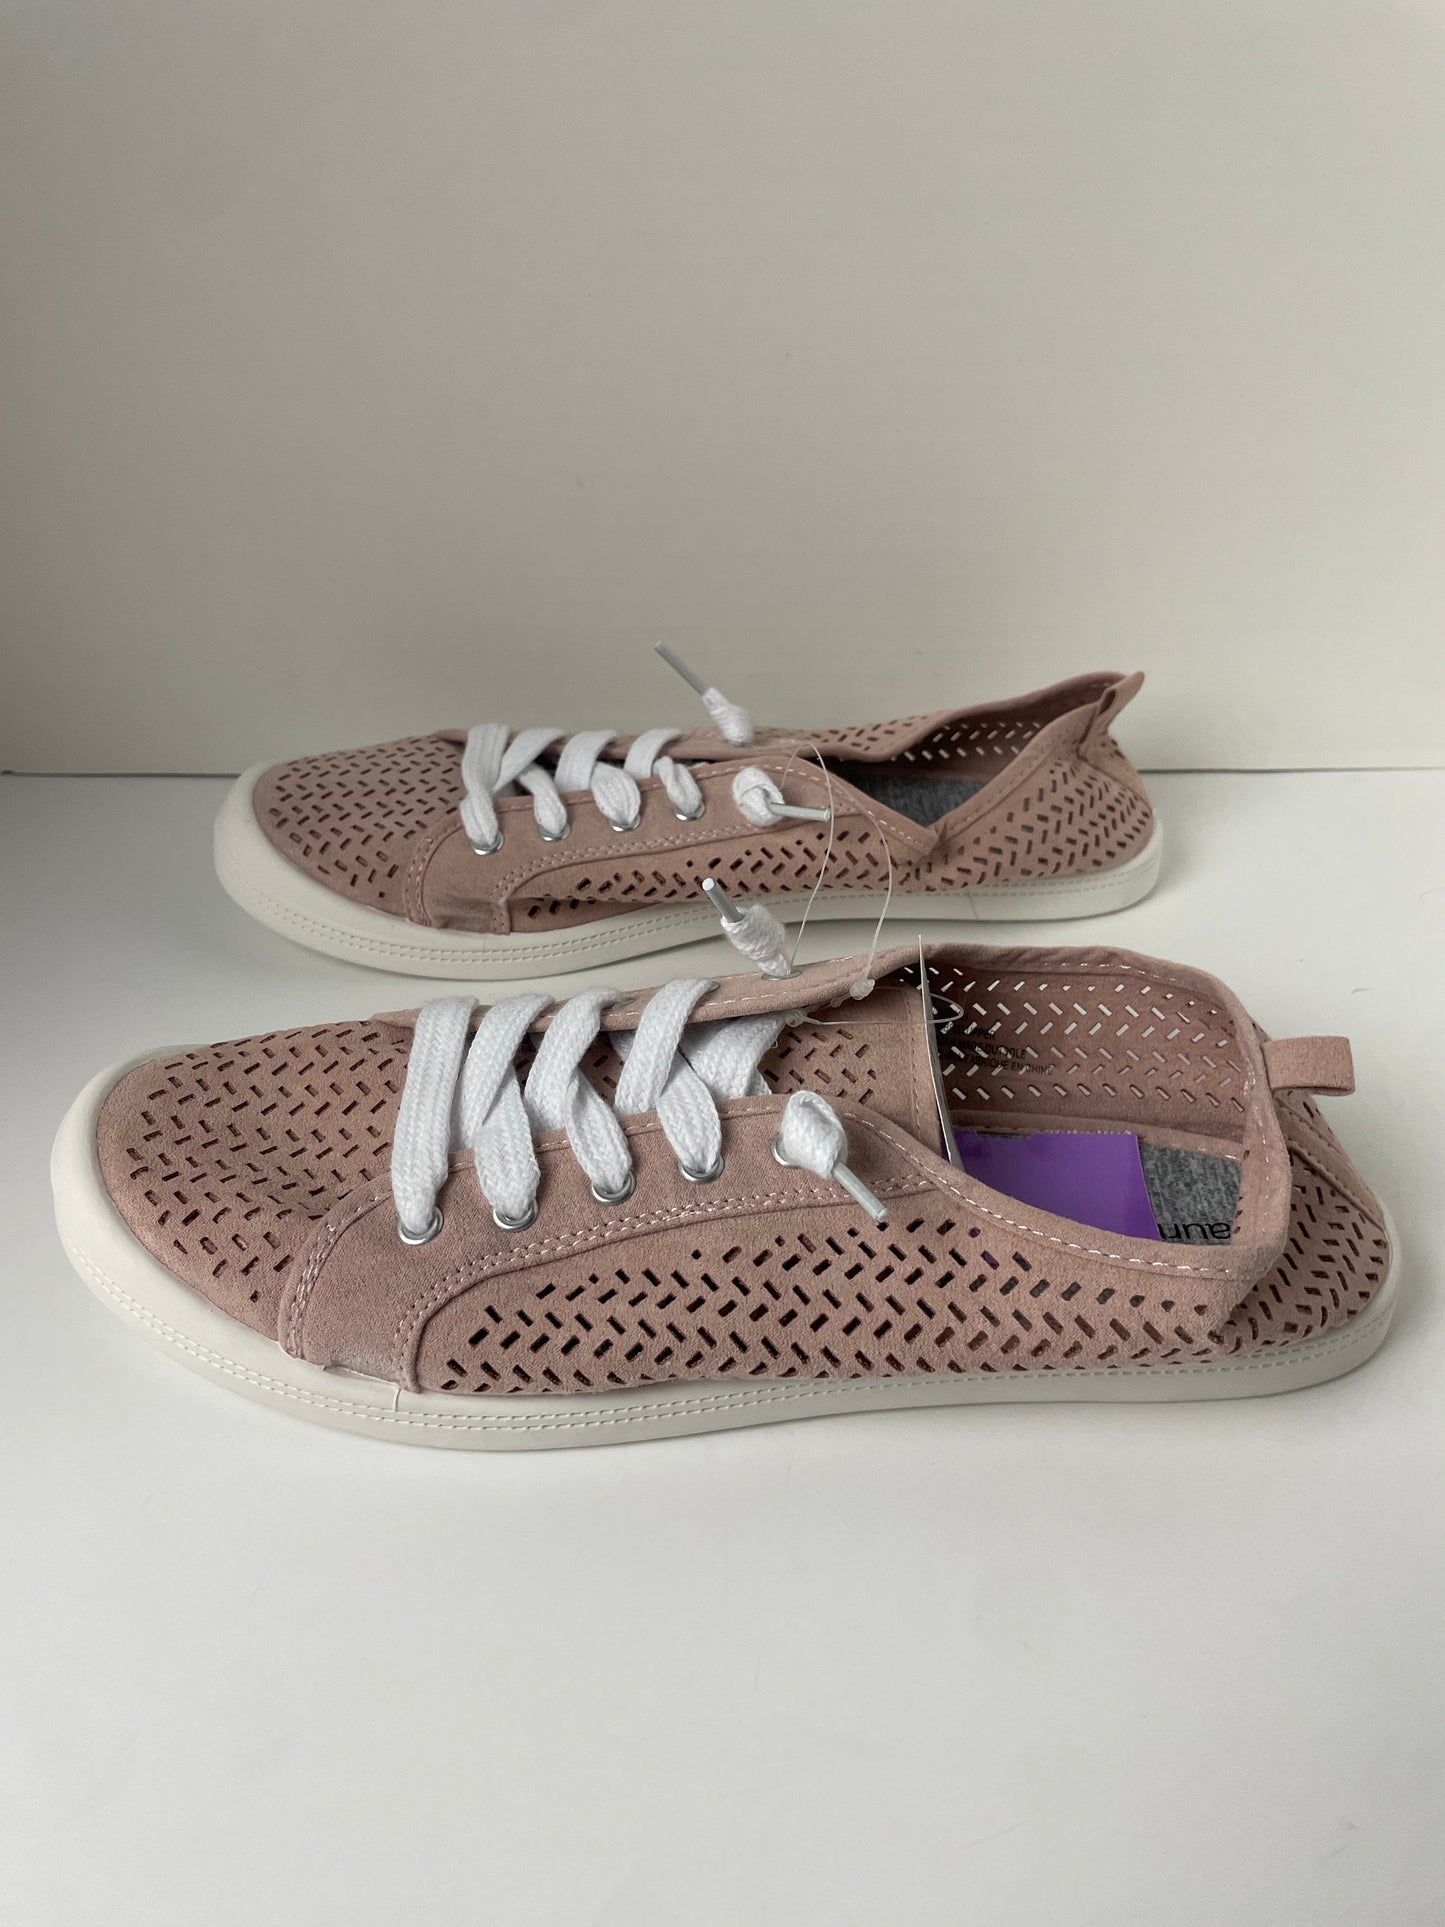 Mauve Shoes Sneakers Maurices, Size 11